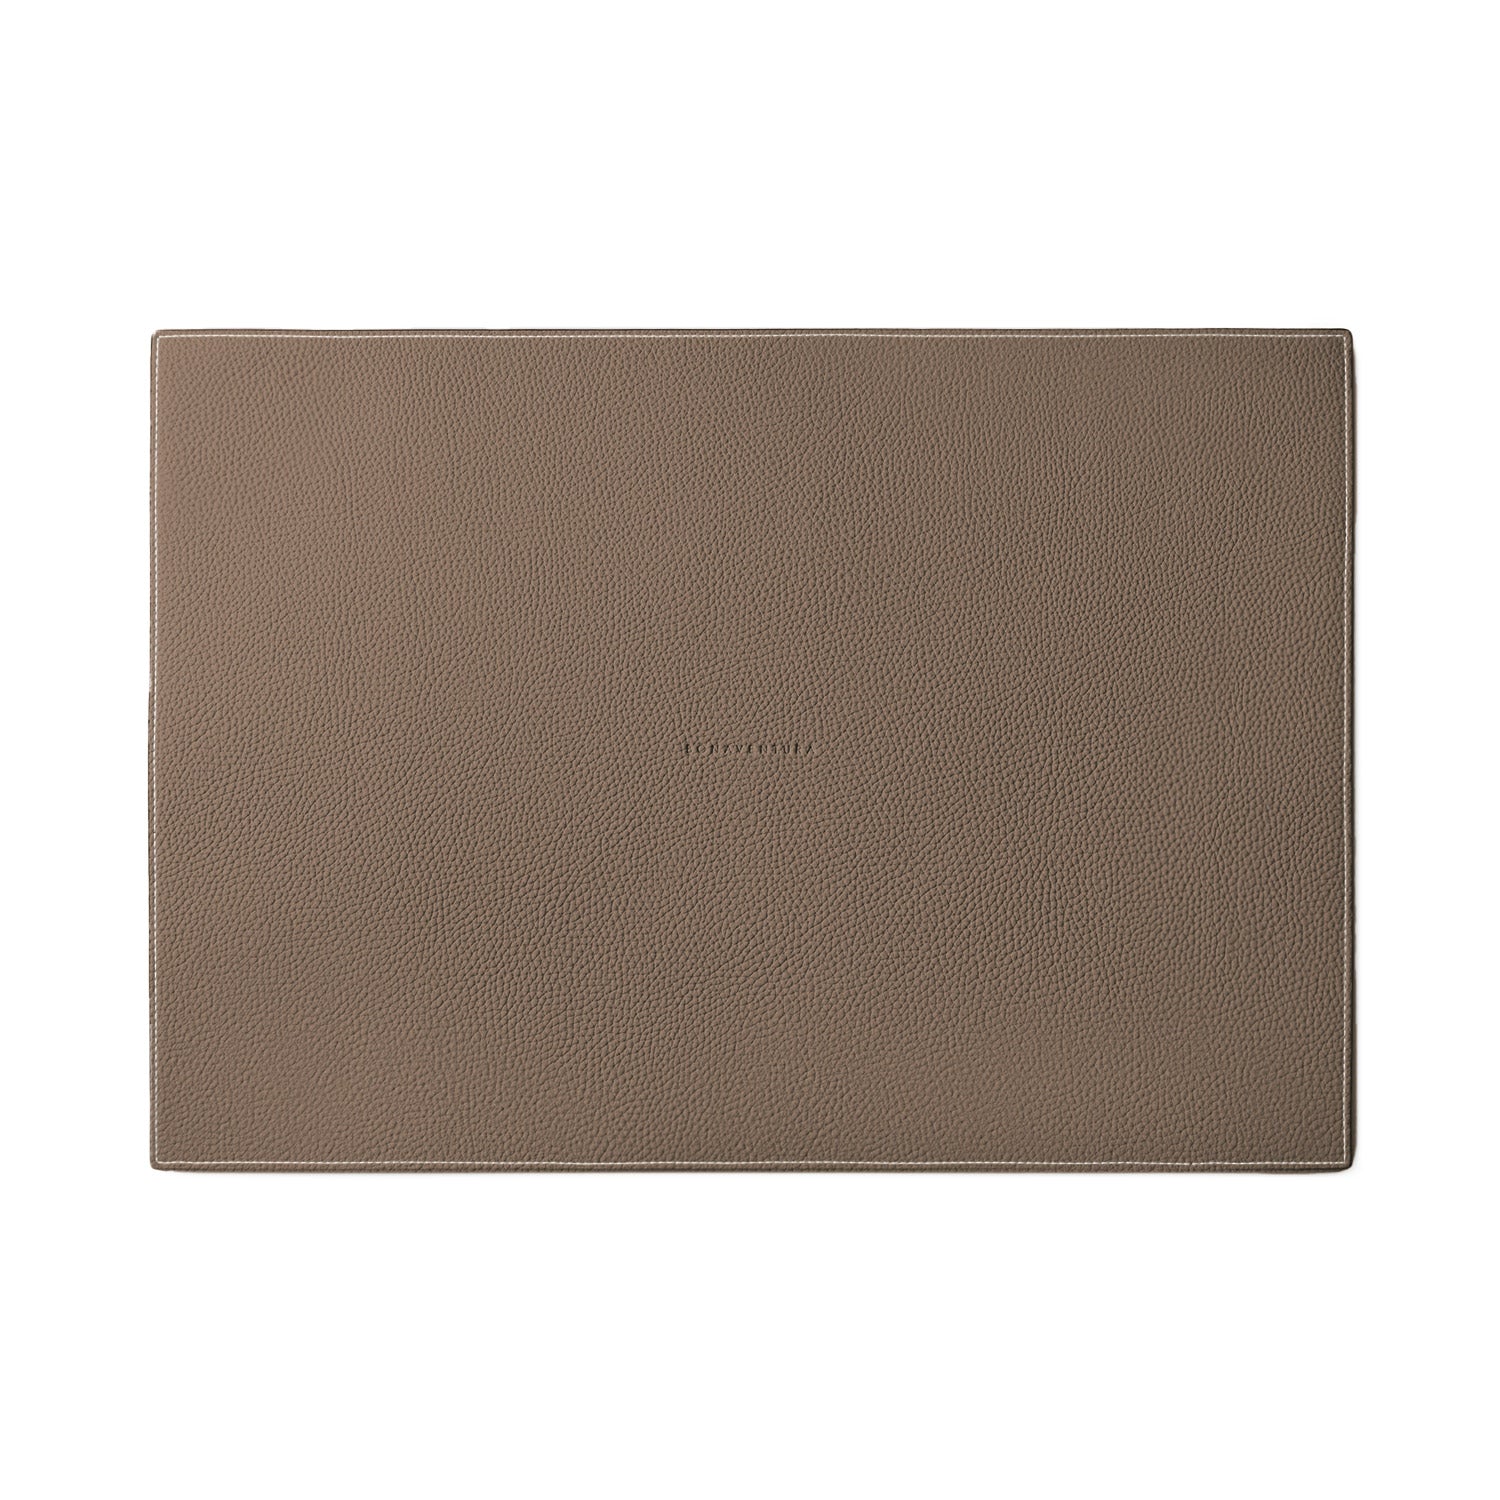 Placemat (square) in shrink leather